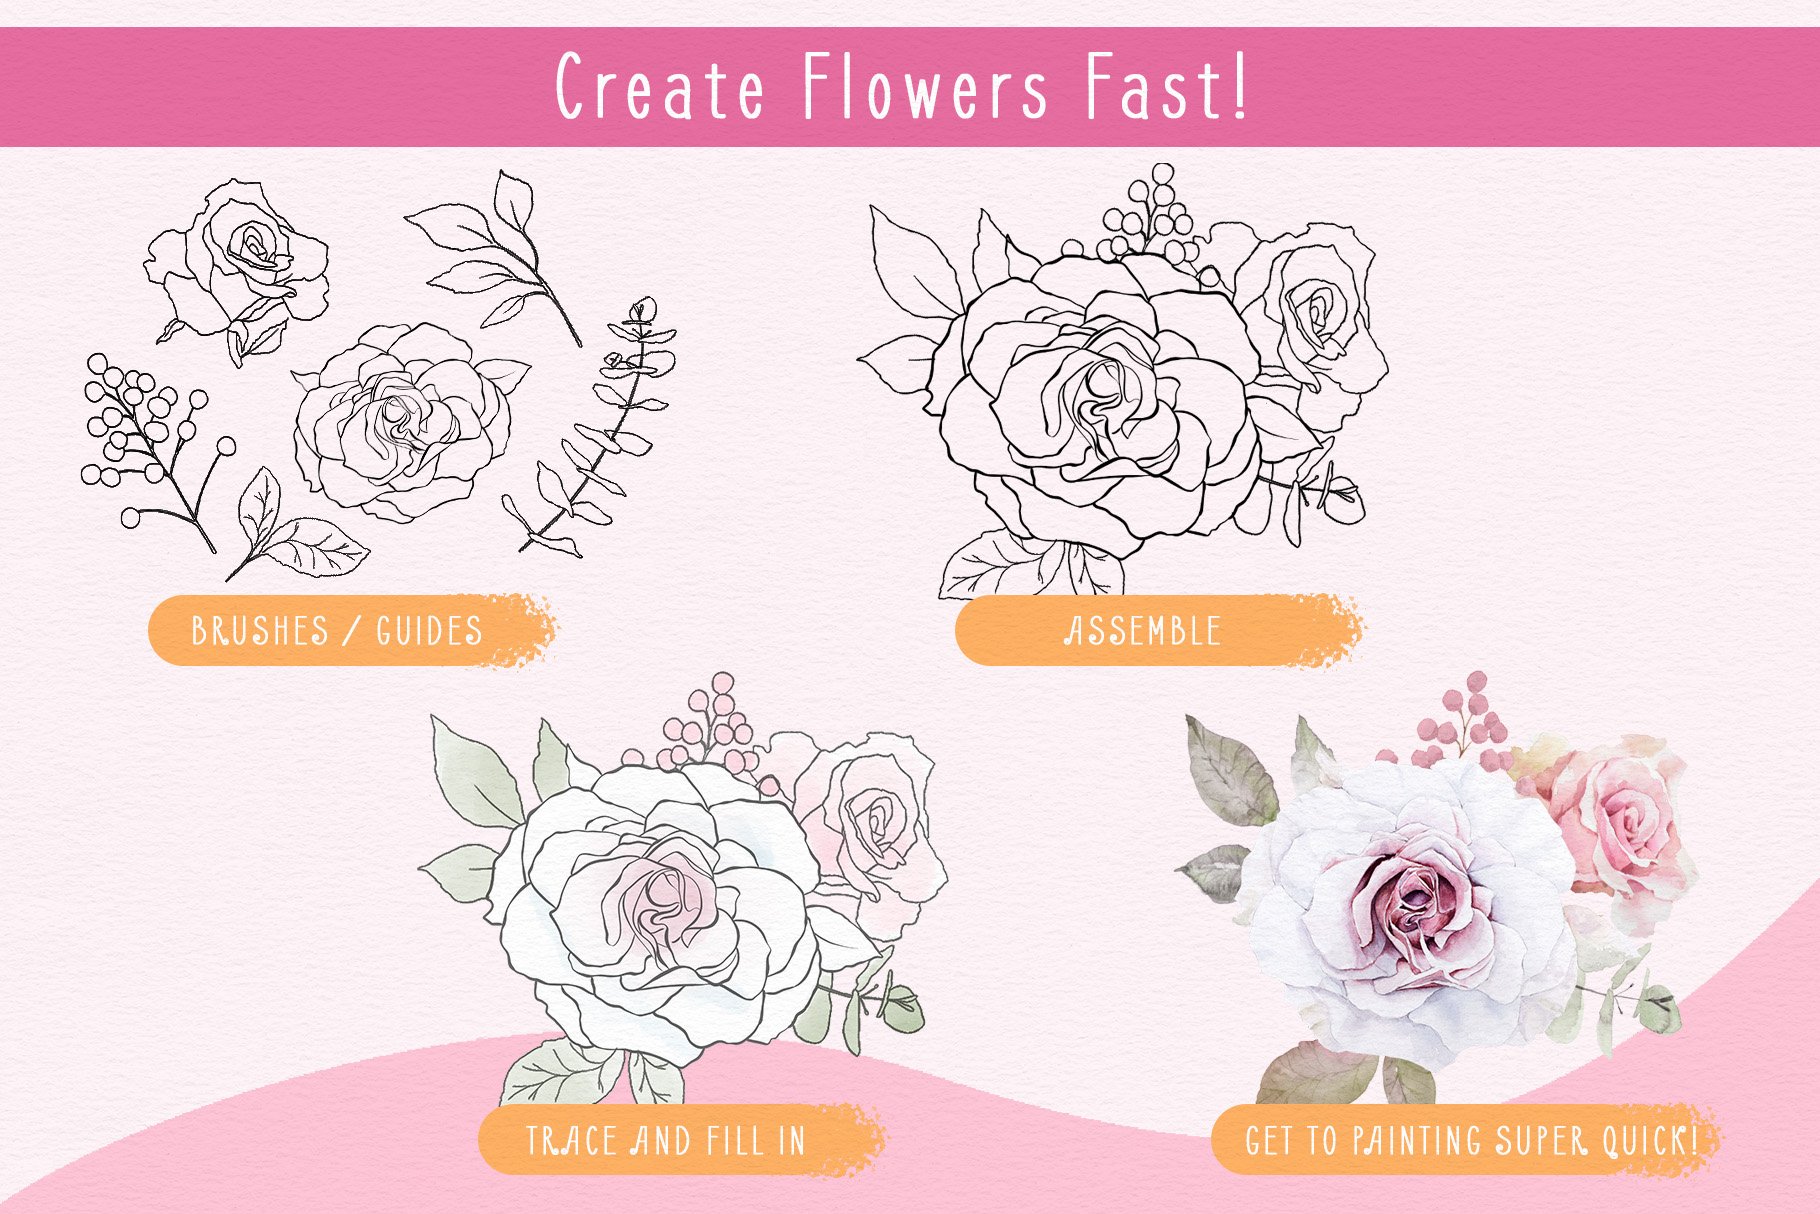 Procreate Flower & Leaf Brush Boxpreview image.